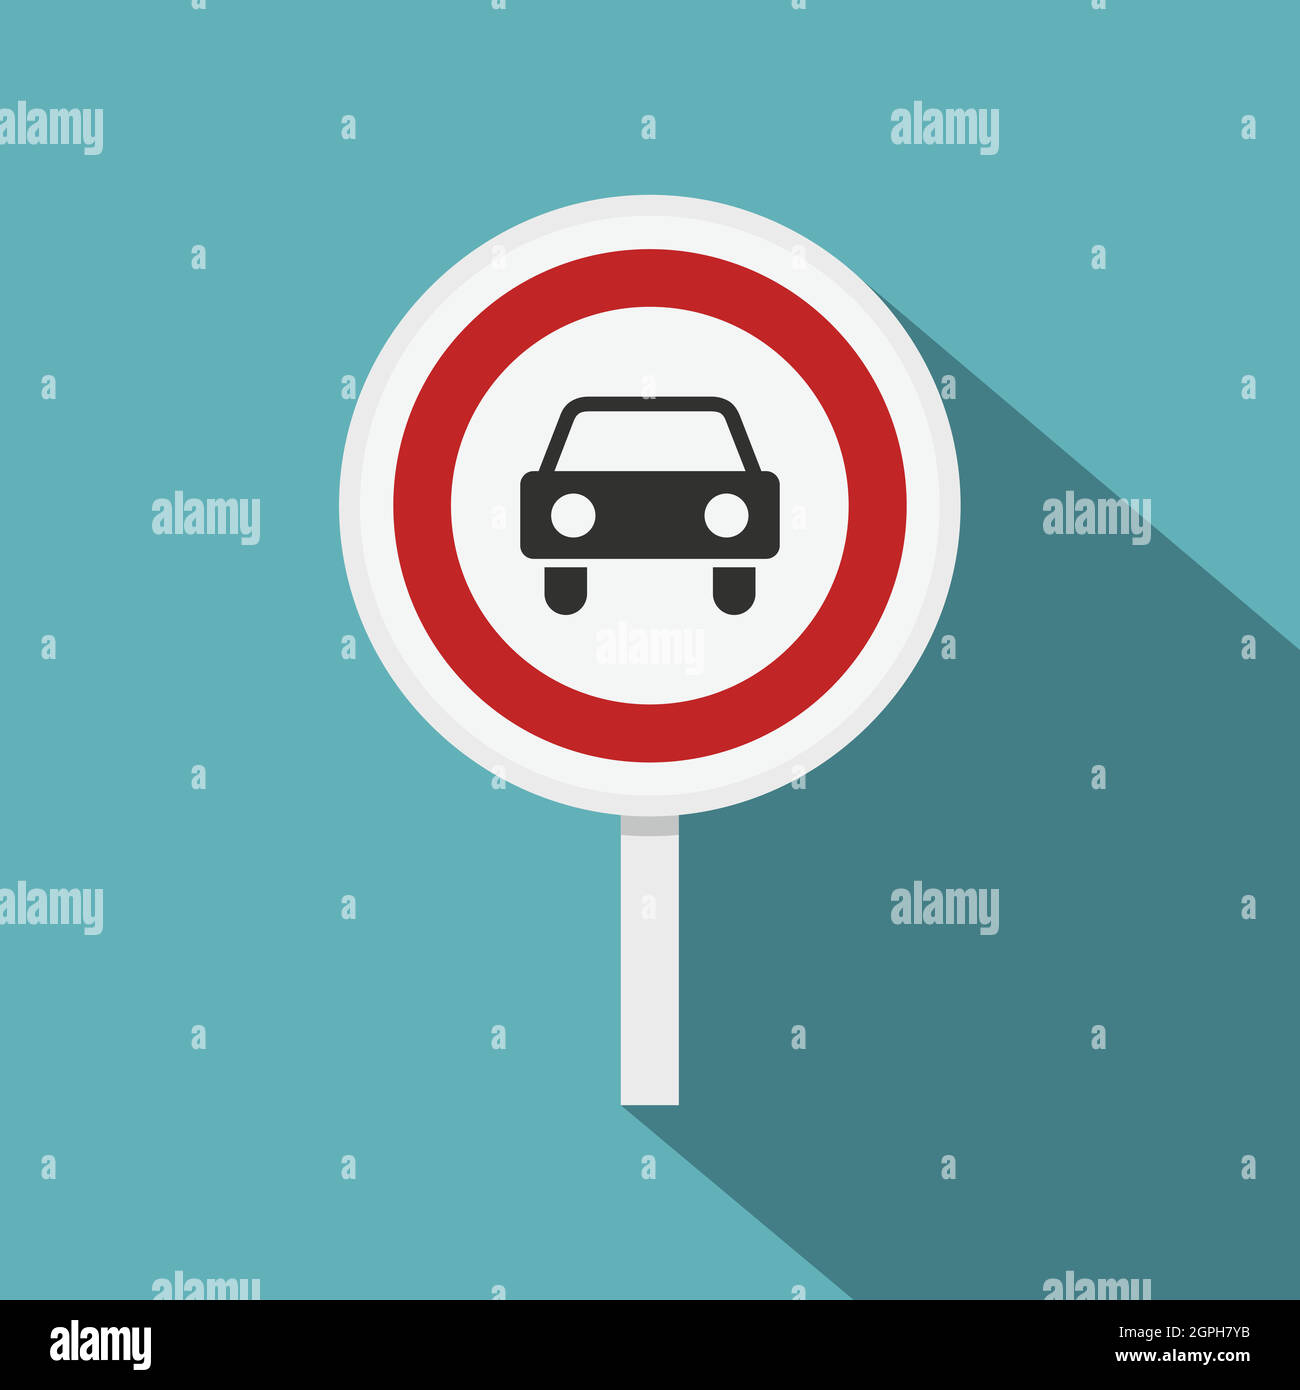 Movement of motor vehicles is forbidden icon Stock Vector